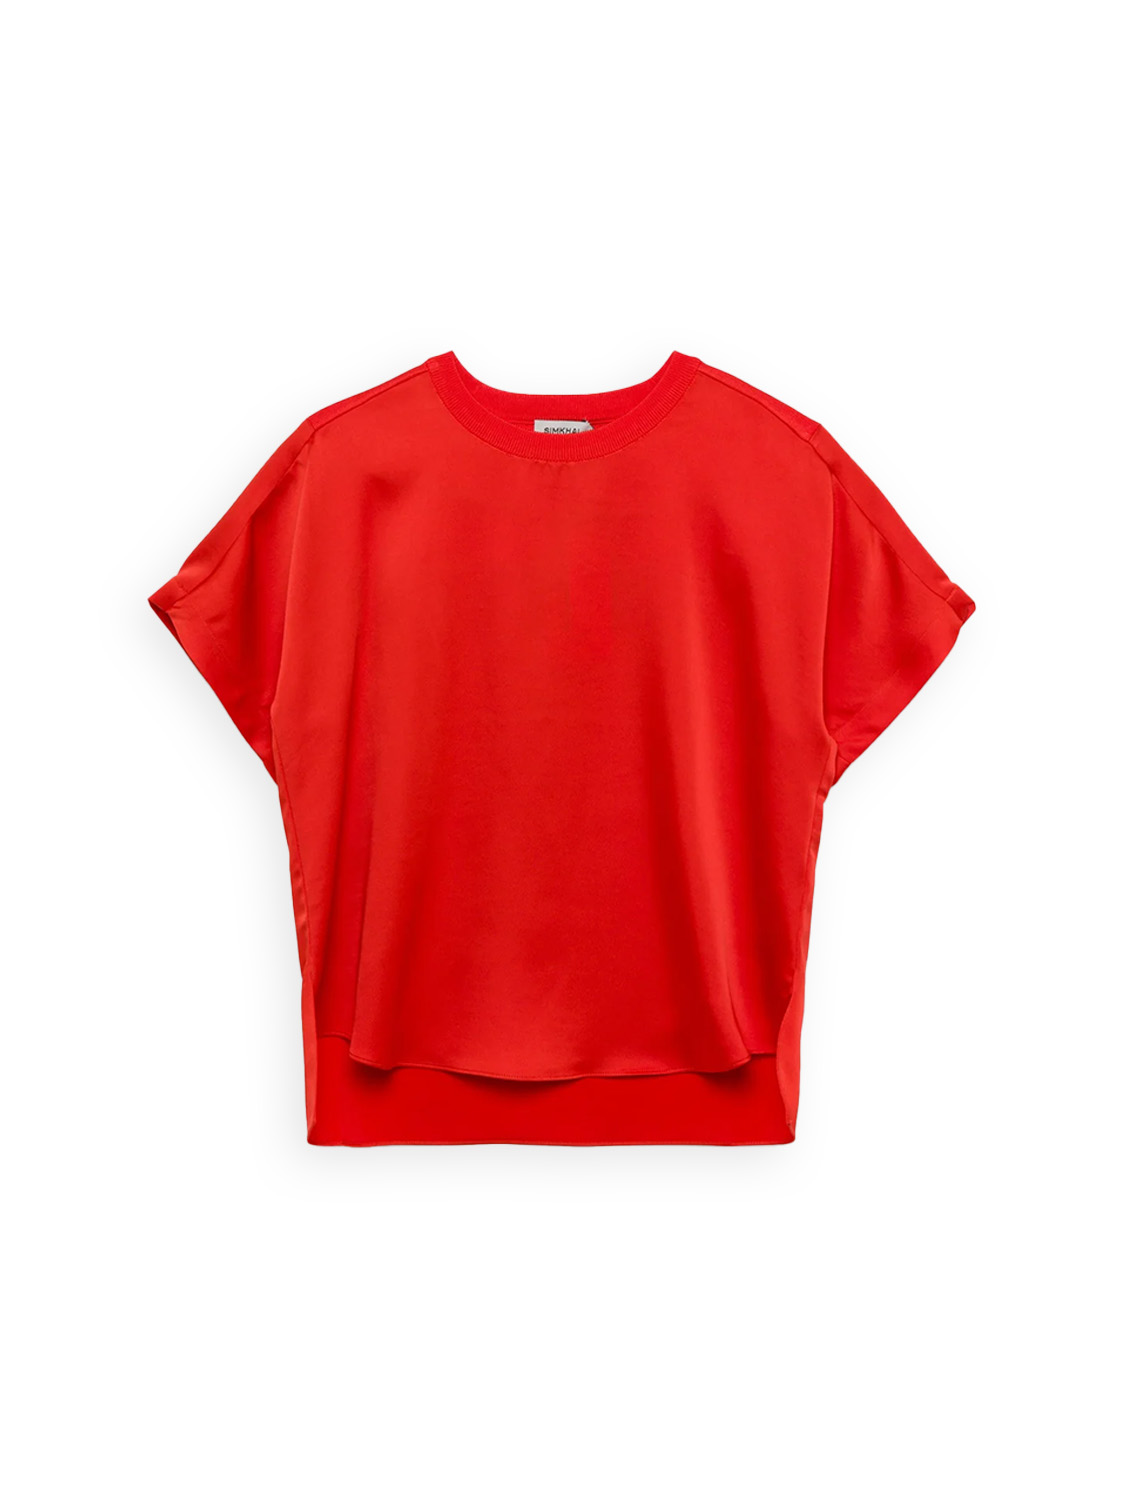 Addy – T-Shirt with a knit back 